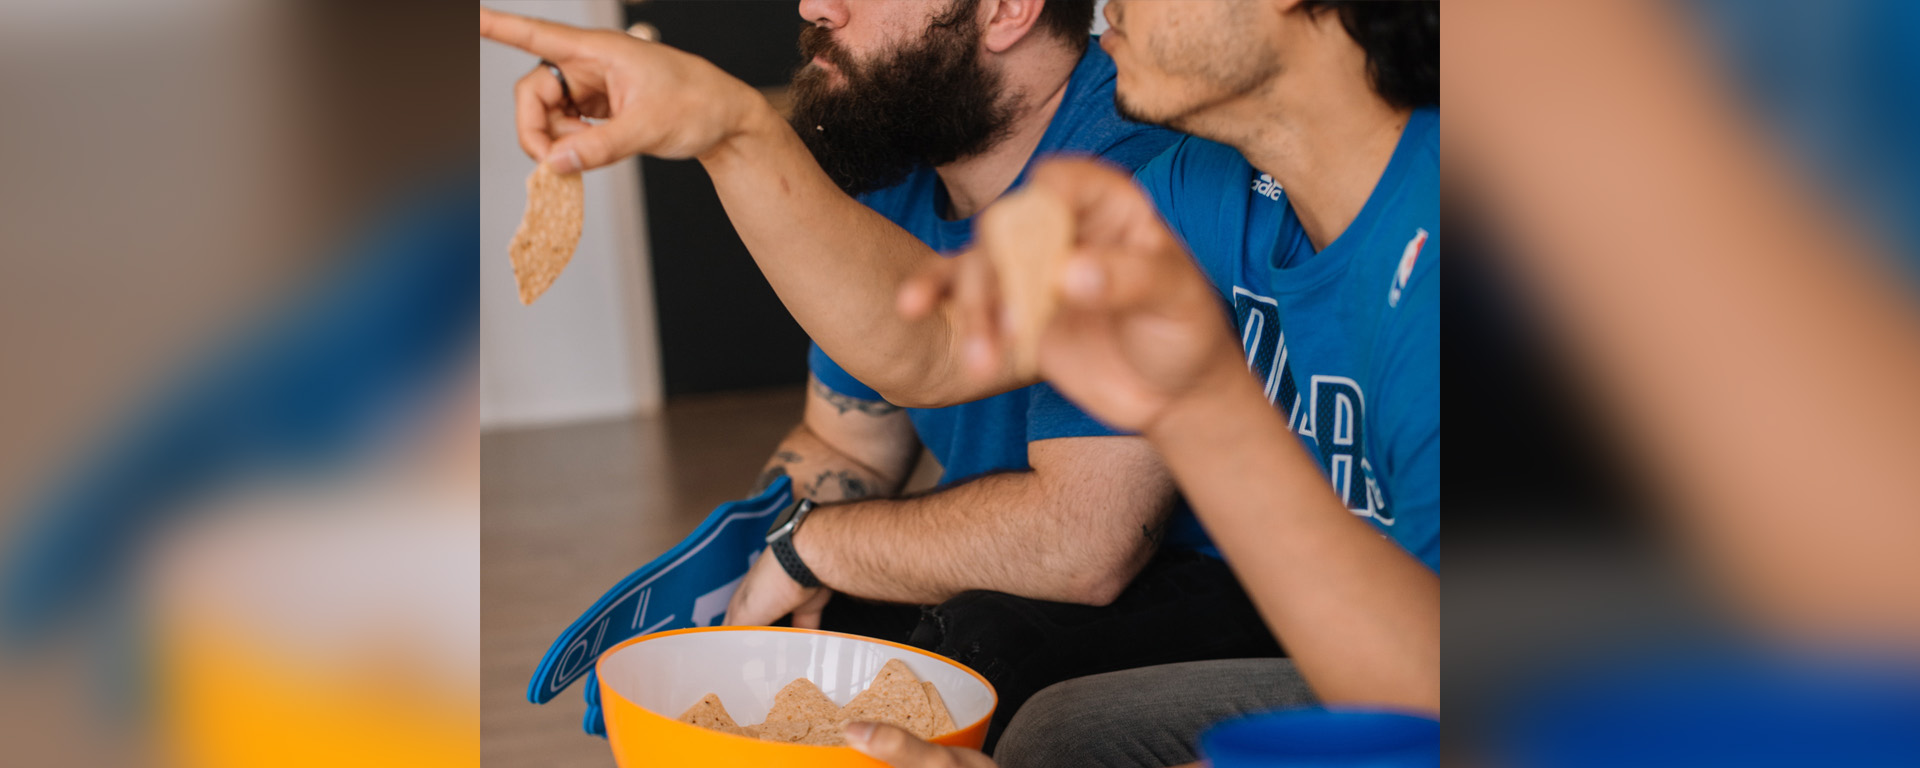 Two men in sports jerseys watching March Madness basketball